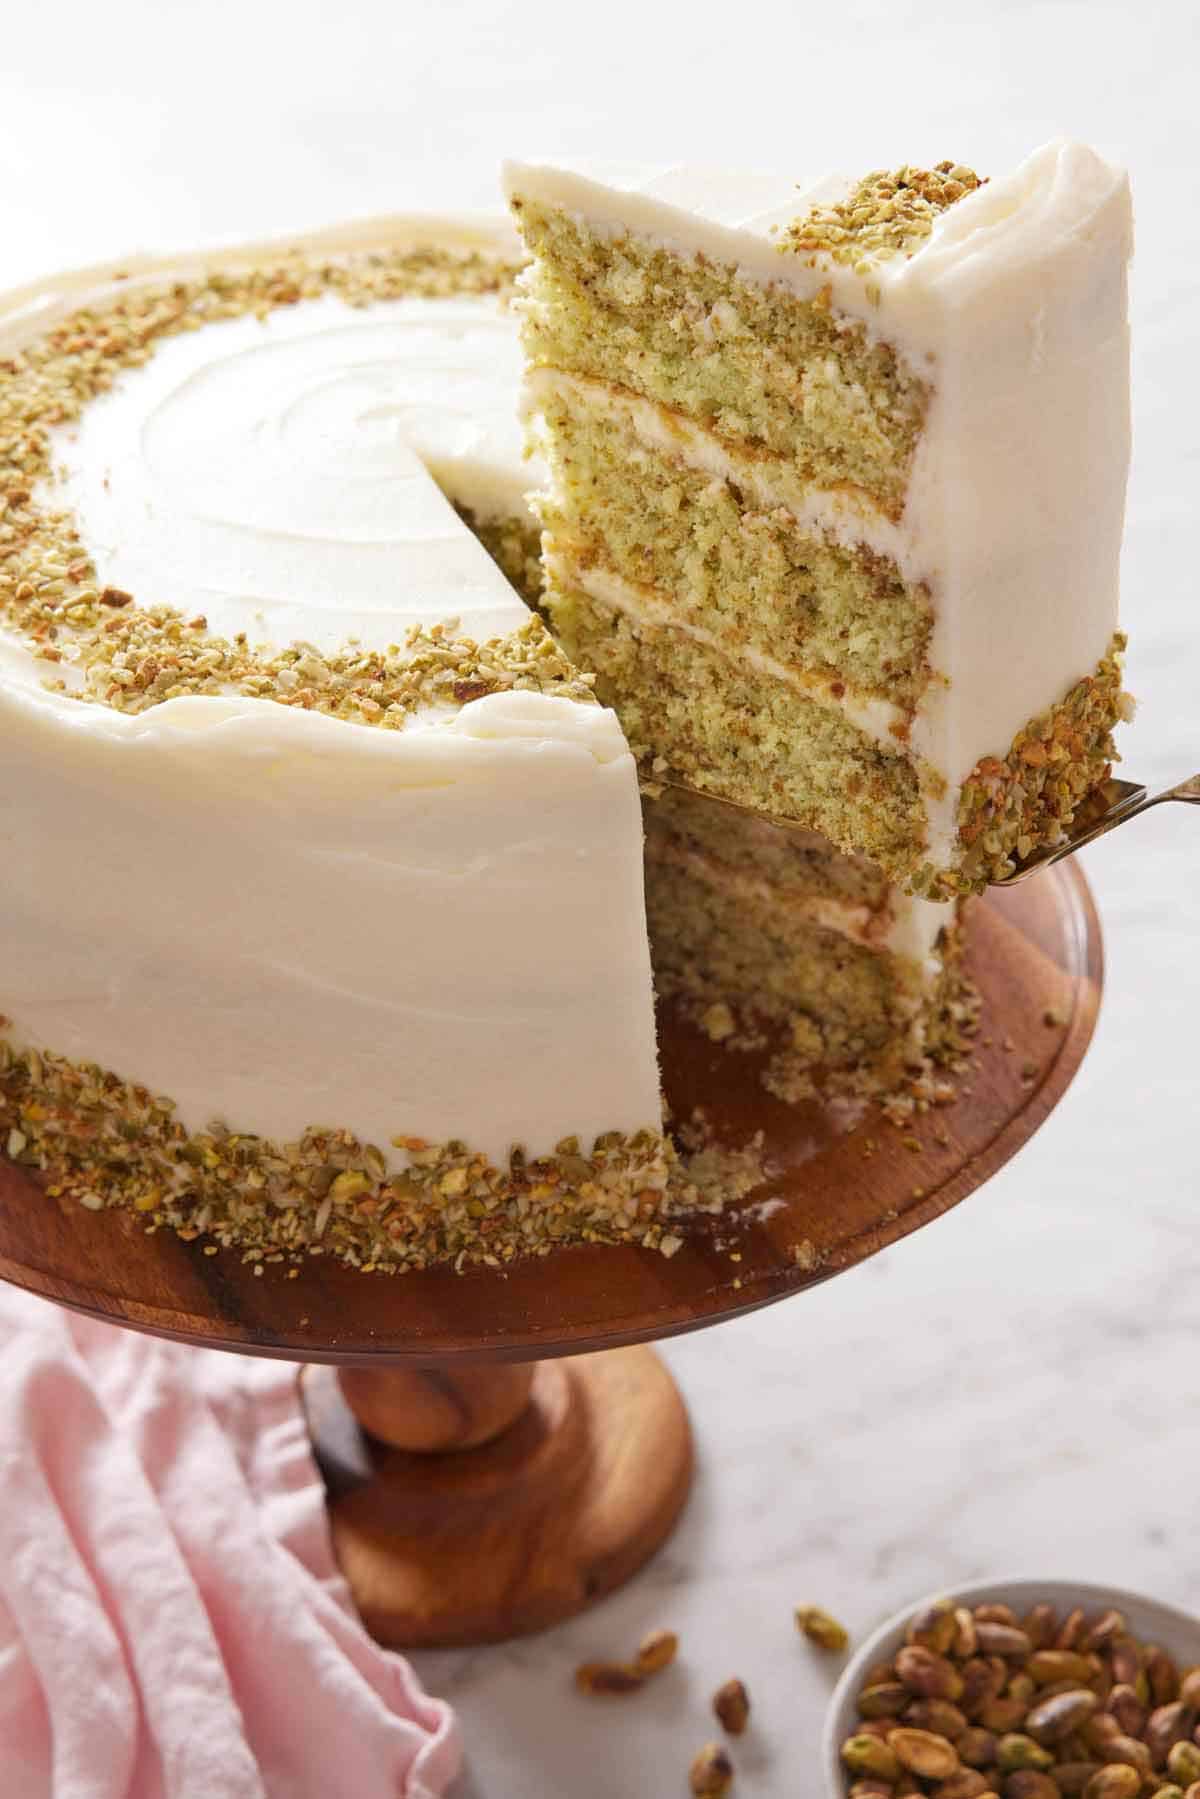 A slice of pistachio cake cut and lifted from the cake on the cake stand.